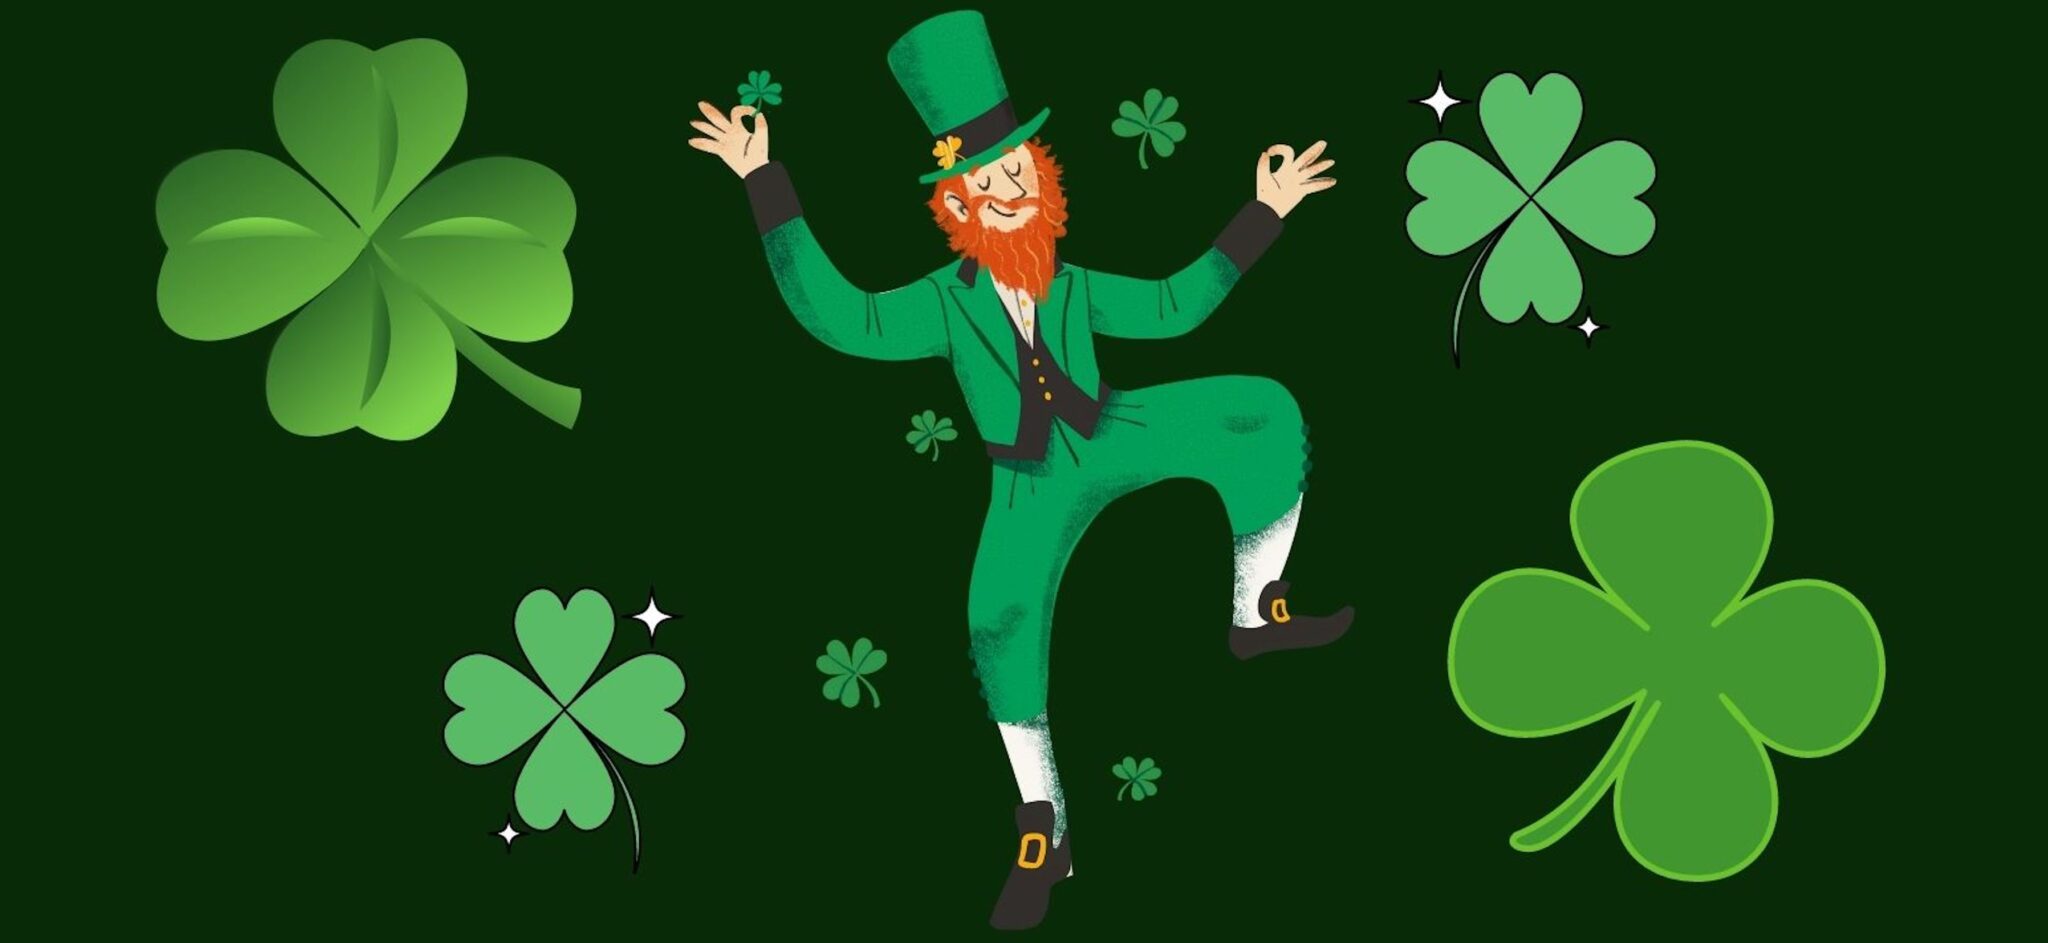 35 Fun St Patricks Day Facts for Kids - Little Learning Corner